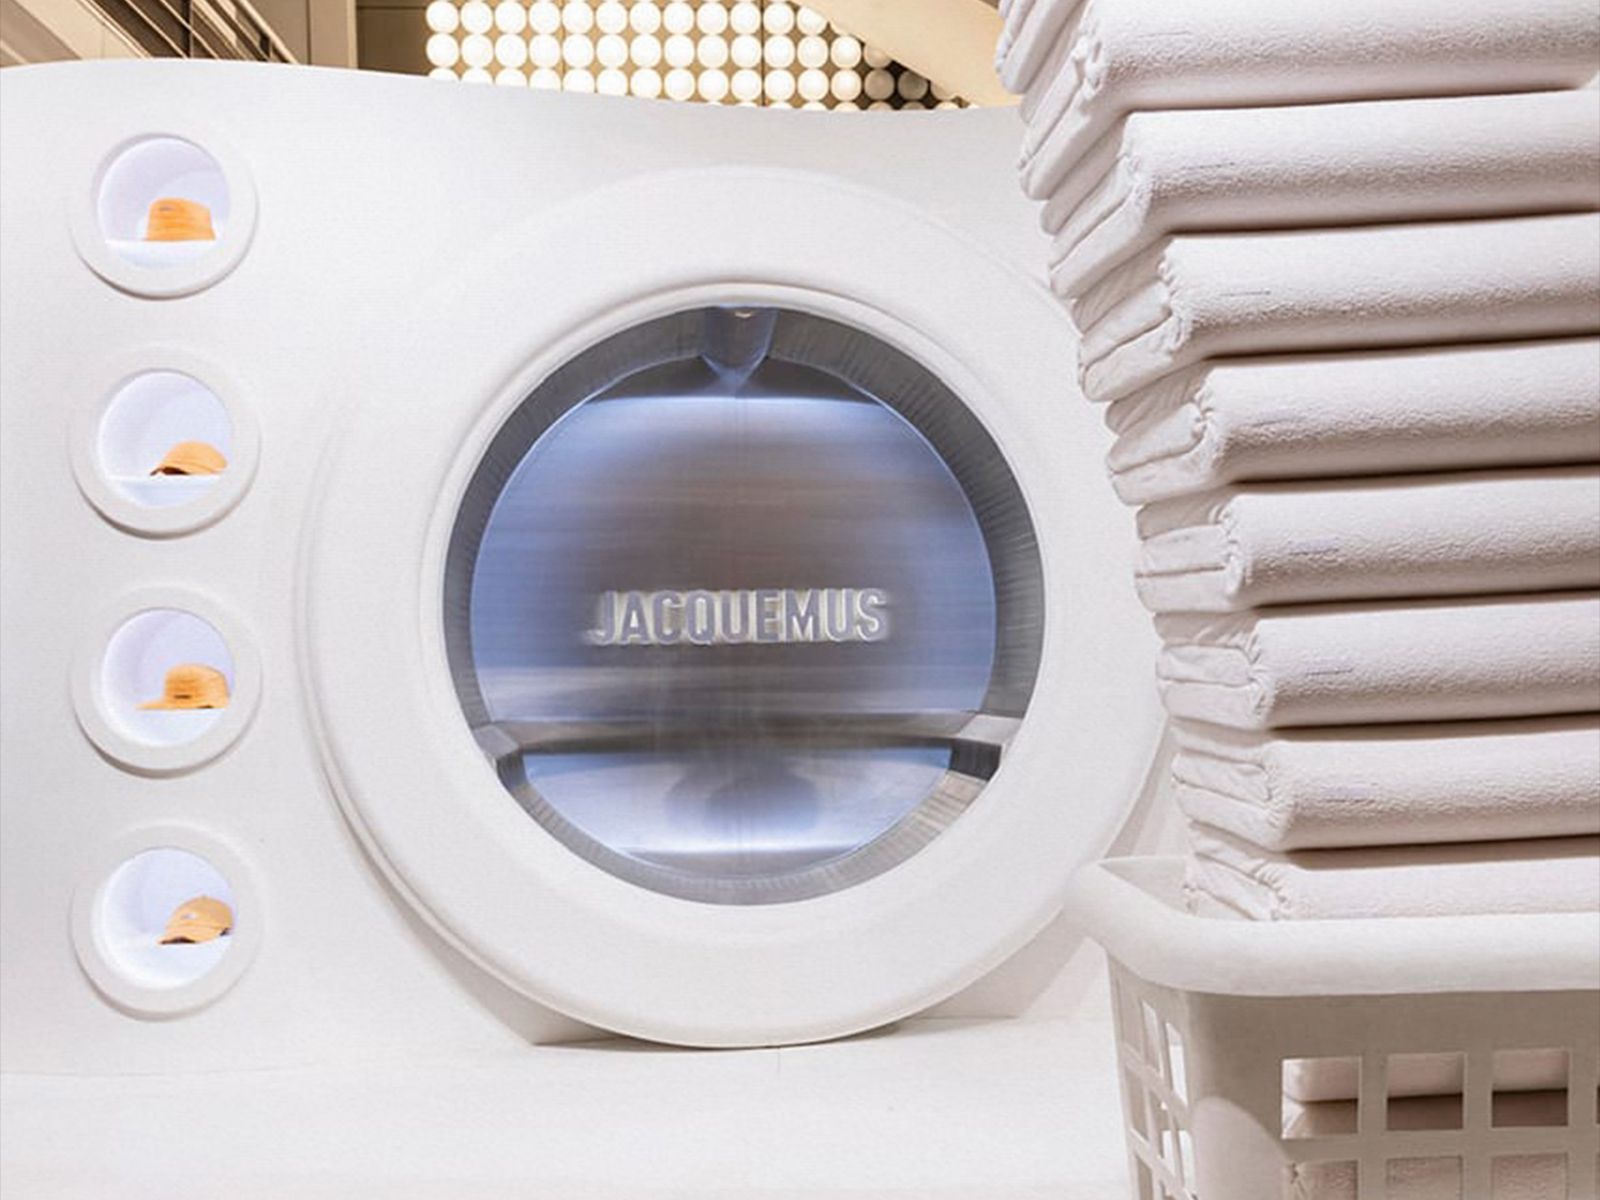 This is the new Jacquemus pop-up in Paris